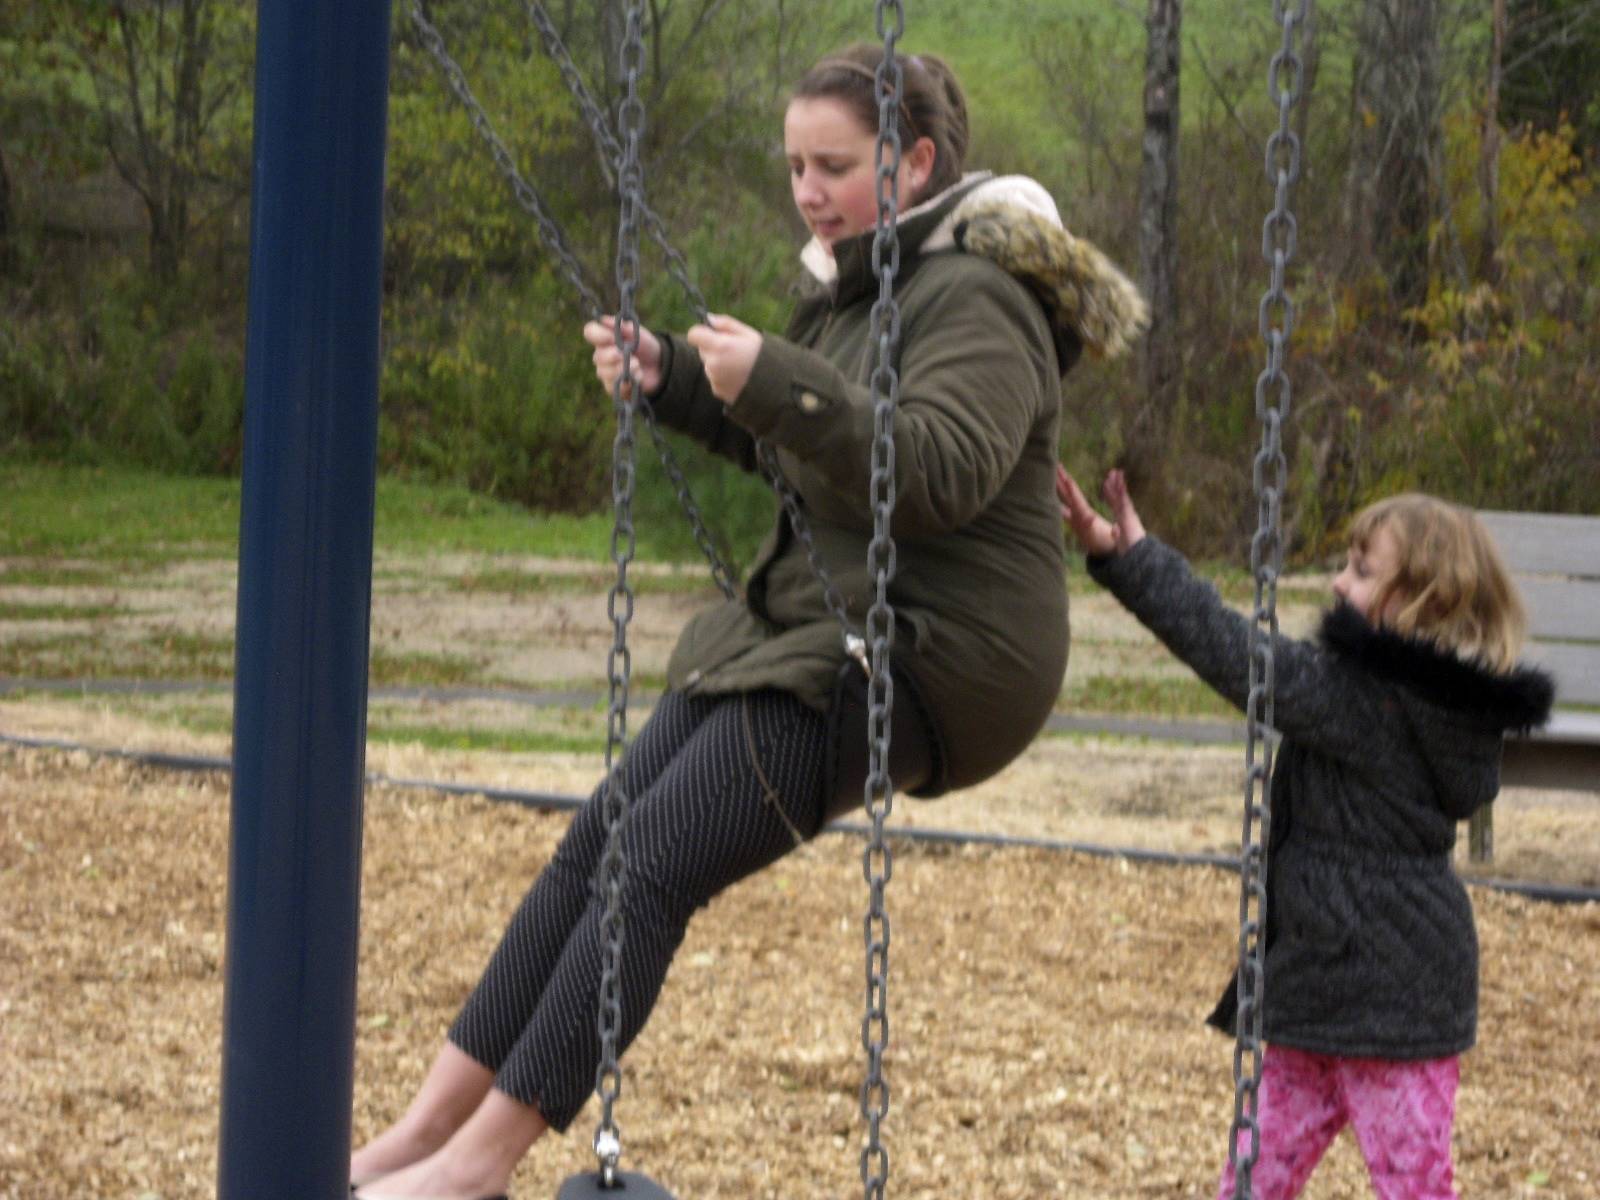 A student pushes her teacher on swing.